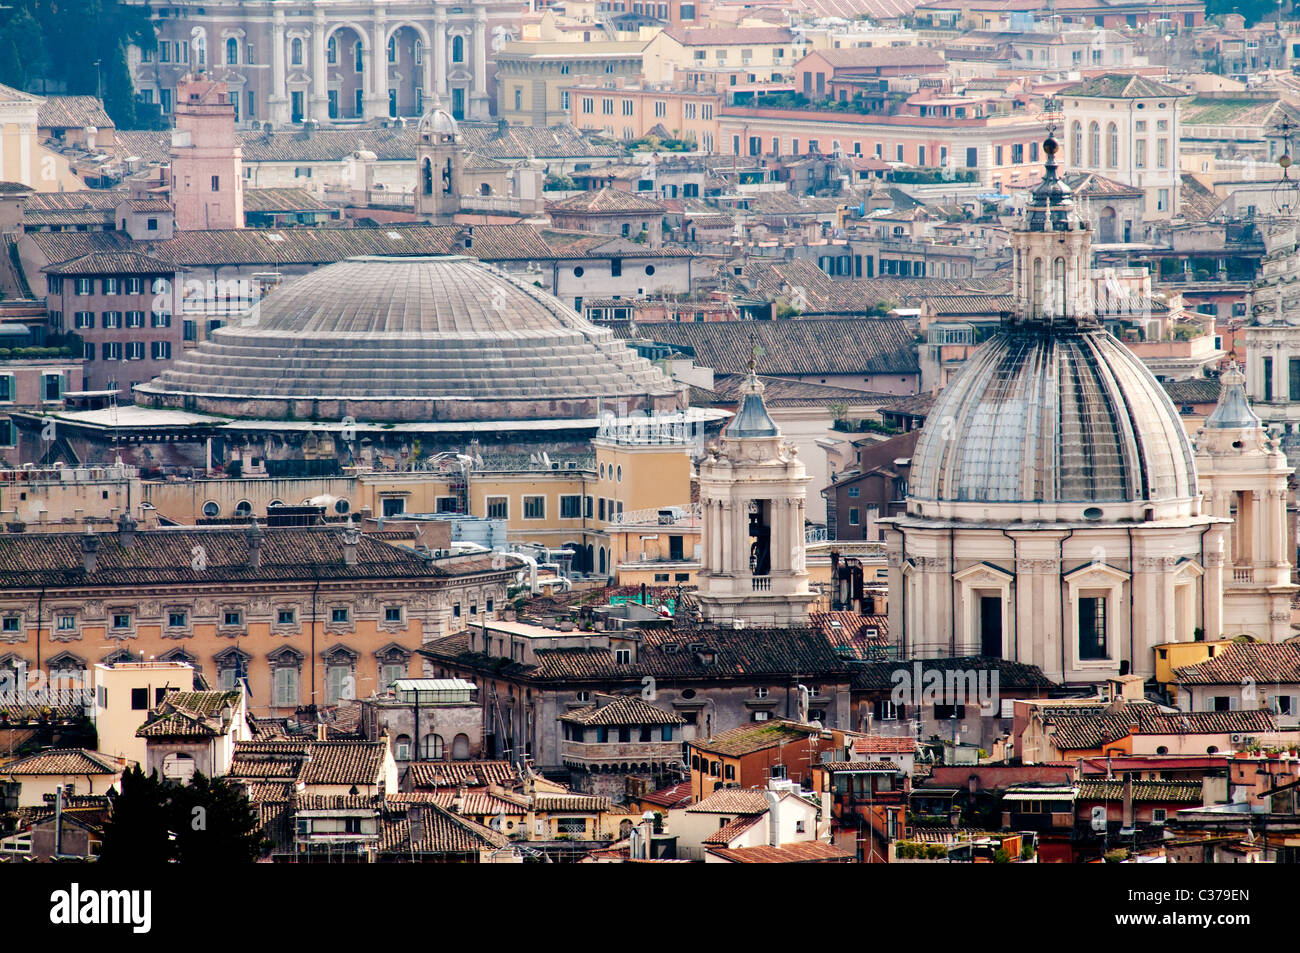 The roof of the Pantheon (left) and Sant'Agnese in Agone (right) towering over the Piazza Navona Stock Photo